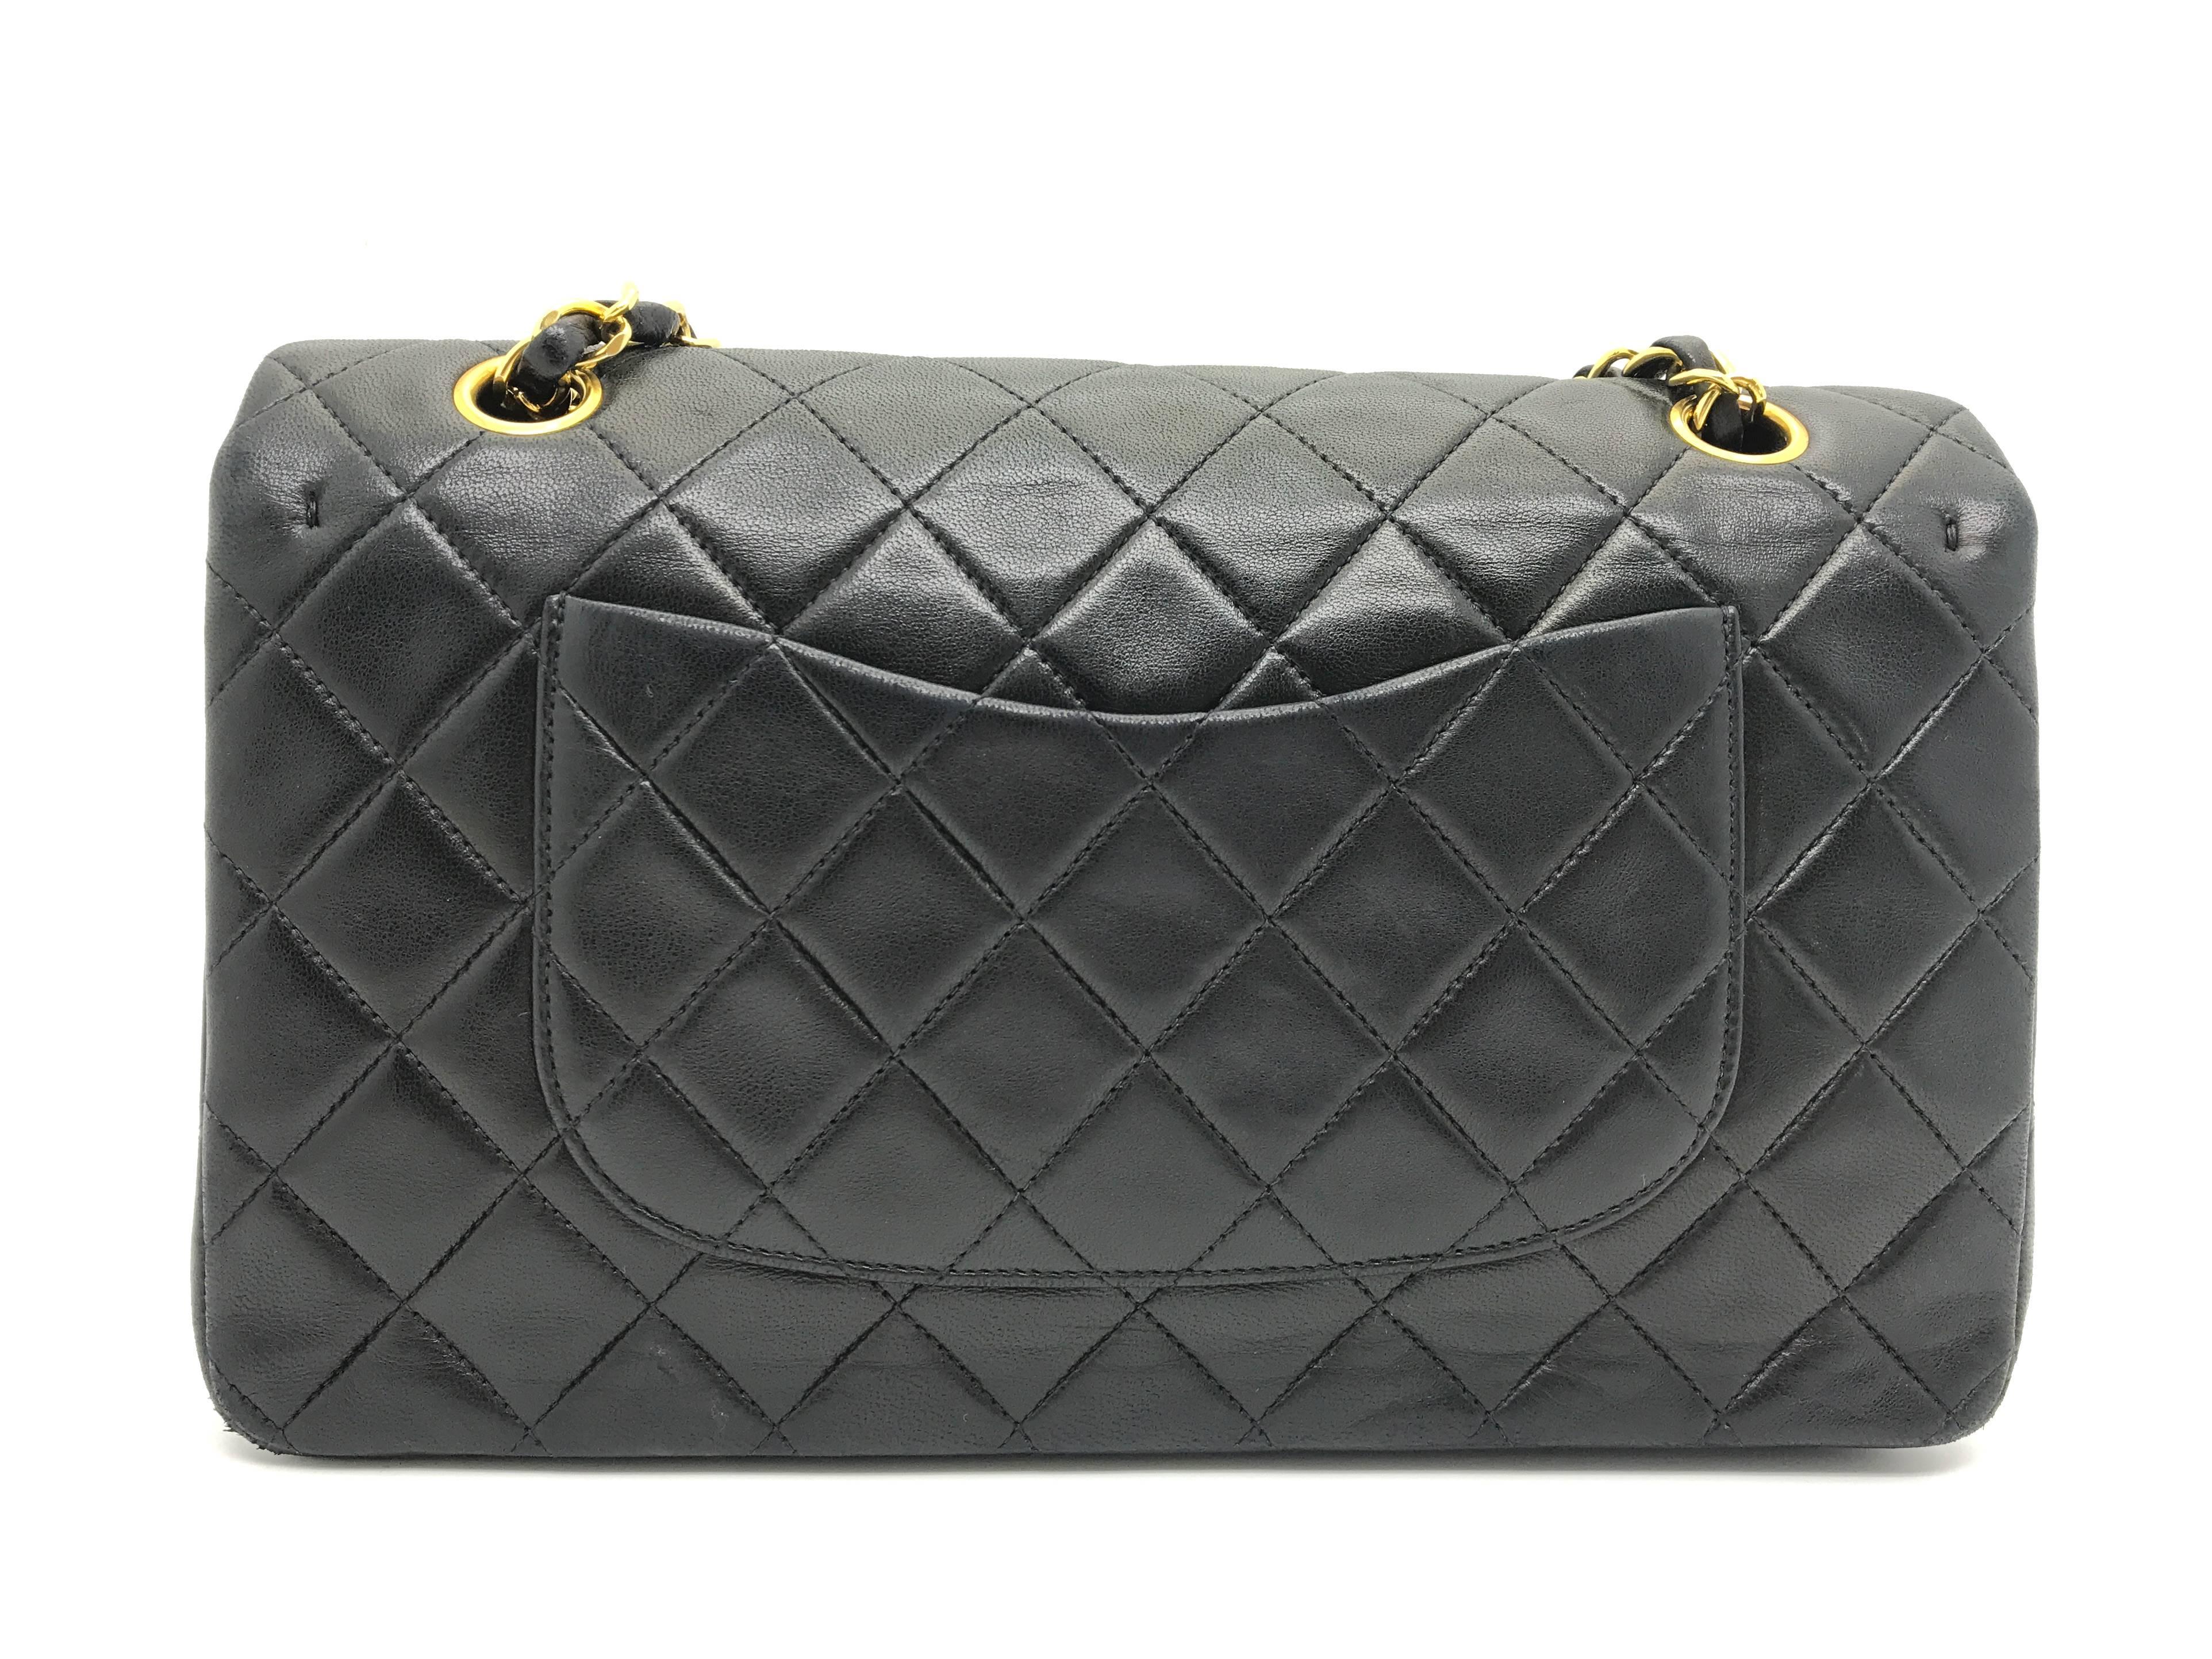 Chanel Classic Double Flap Black Quilting Lambskin Leather Shoulder Bag In Good Condition For Sale In Kowloon, HK